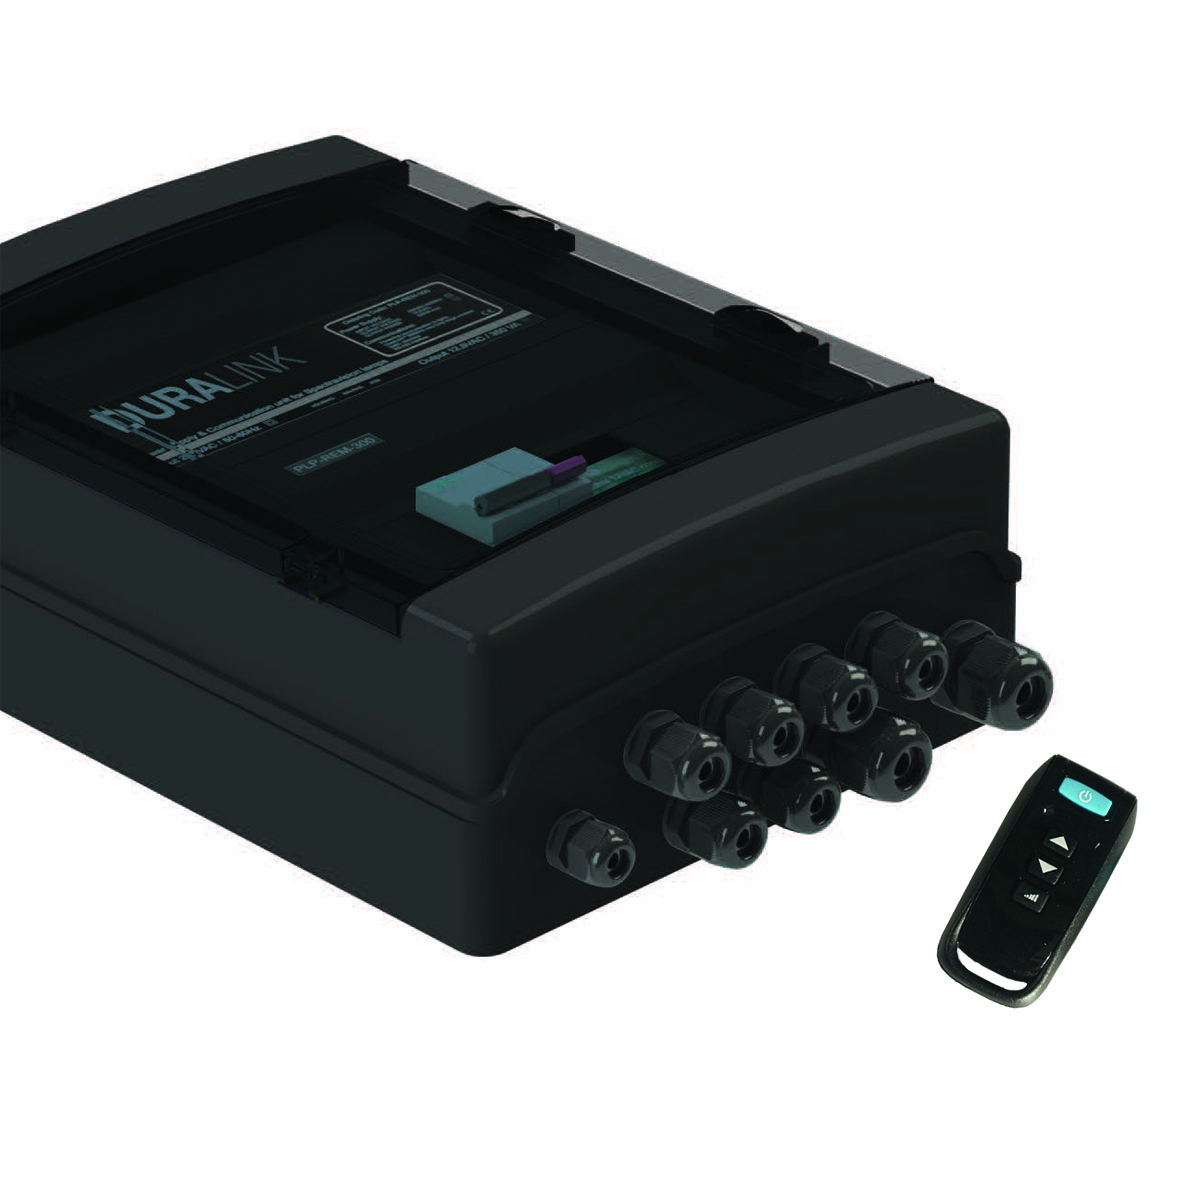 Adagio Pro RGB Control DMX512 & RS-485 connectivity with 350 VA transformer, black, dimming function, 2 auxiliary outputs, incl. 1 hand transmitter Adagio Pro RGB Control DMX512 & RS-485 connectivity with 350 VA transformer, black, dimming function, 2 auxiliary outputs, incl. 1 hand transmitter